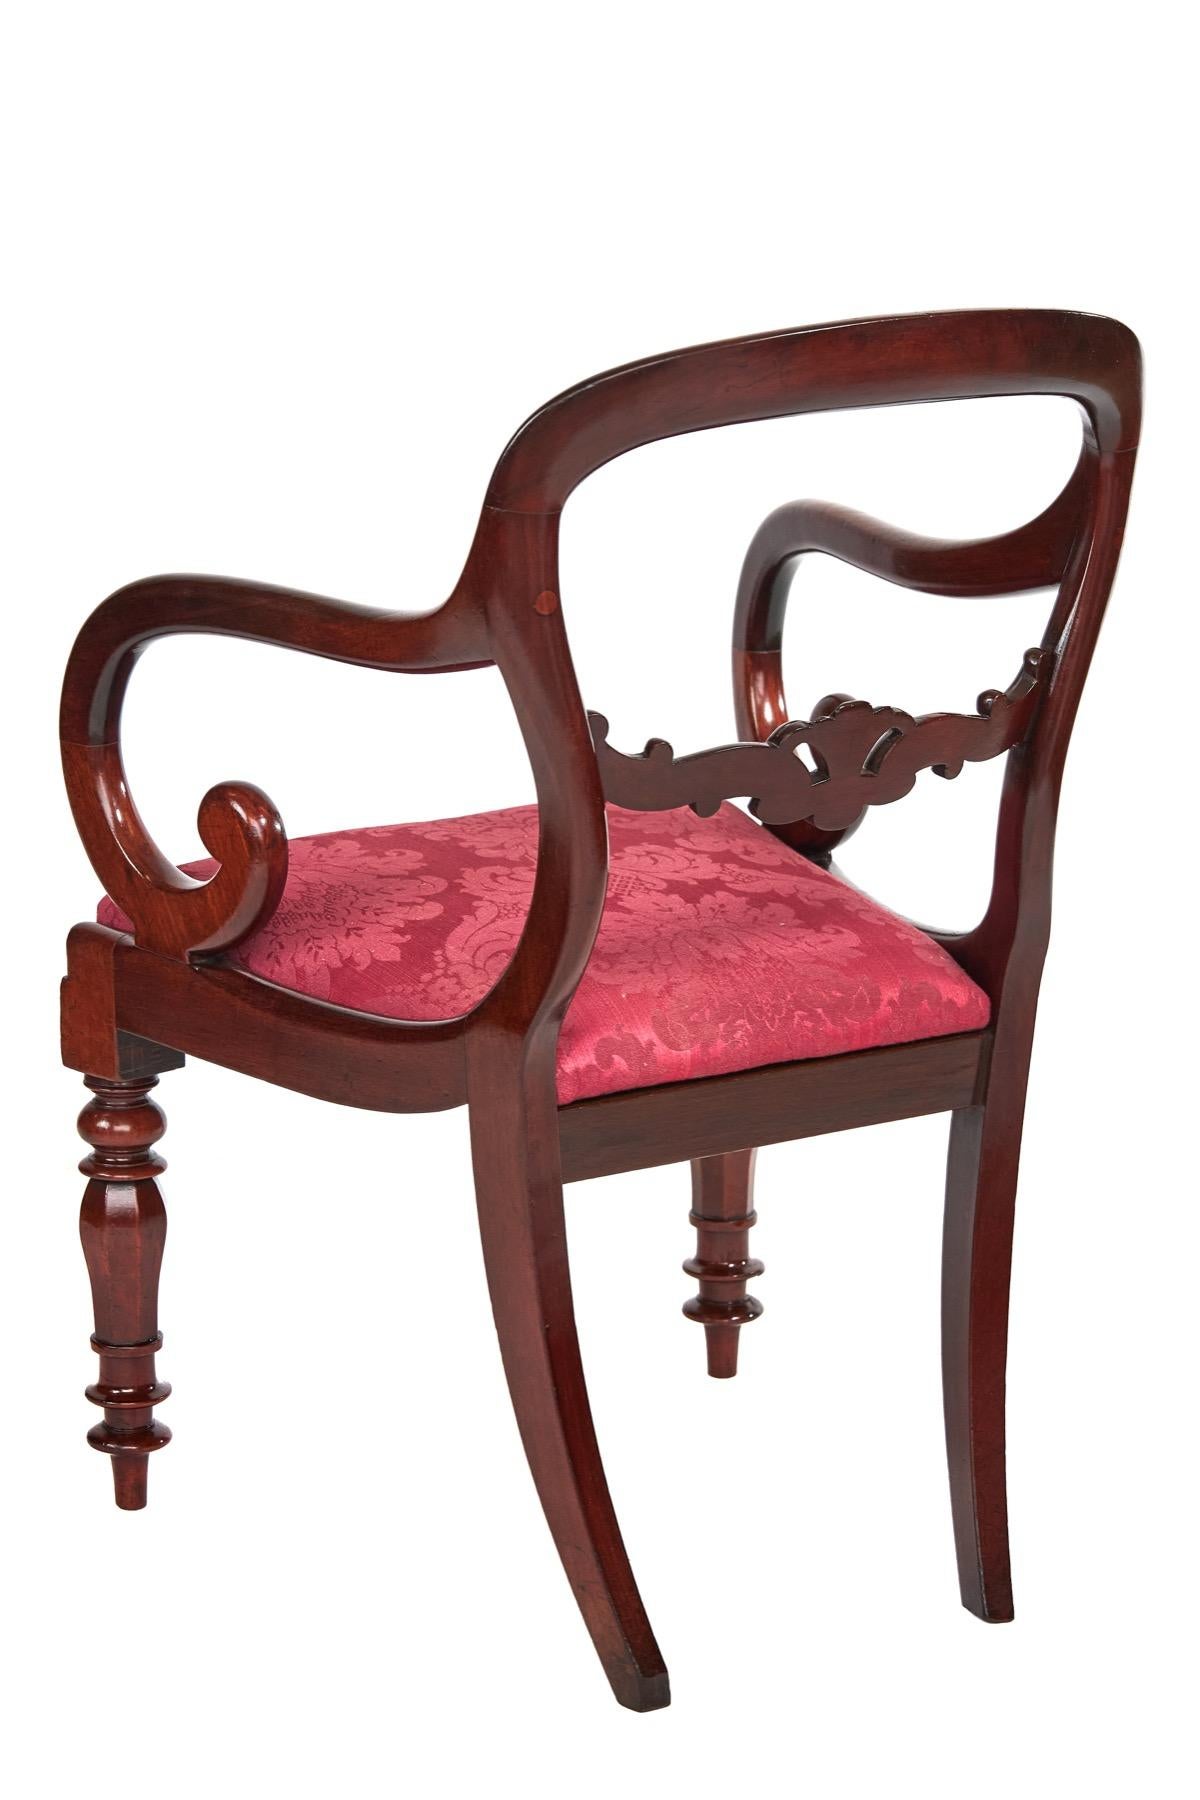 W1V Period mahogany desk elbow chair
BaIloon Shaped Back, 
Carved Back Splat,
Turned Hexagonal Shaped Front Legs,
Drop in seat,
Recently Polished
Seat Height: 45cm 
seat Width : 45cm
Seat Depth; 45cm.